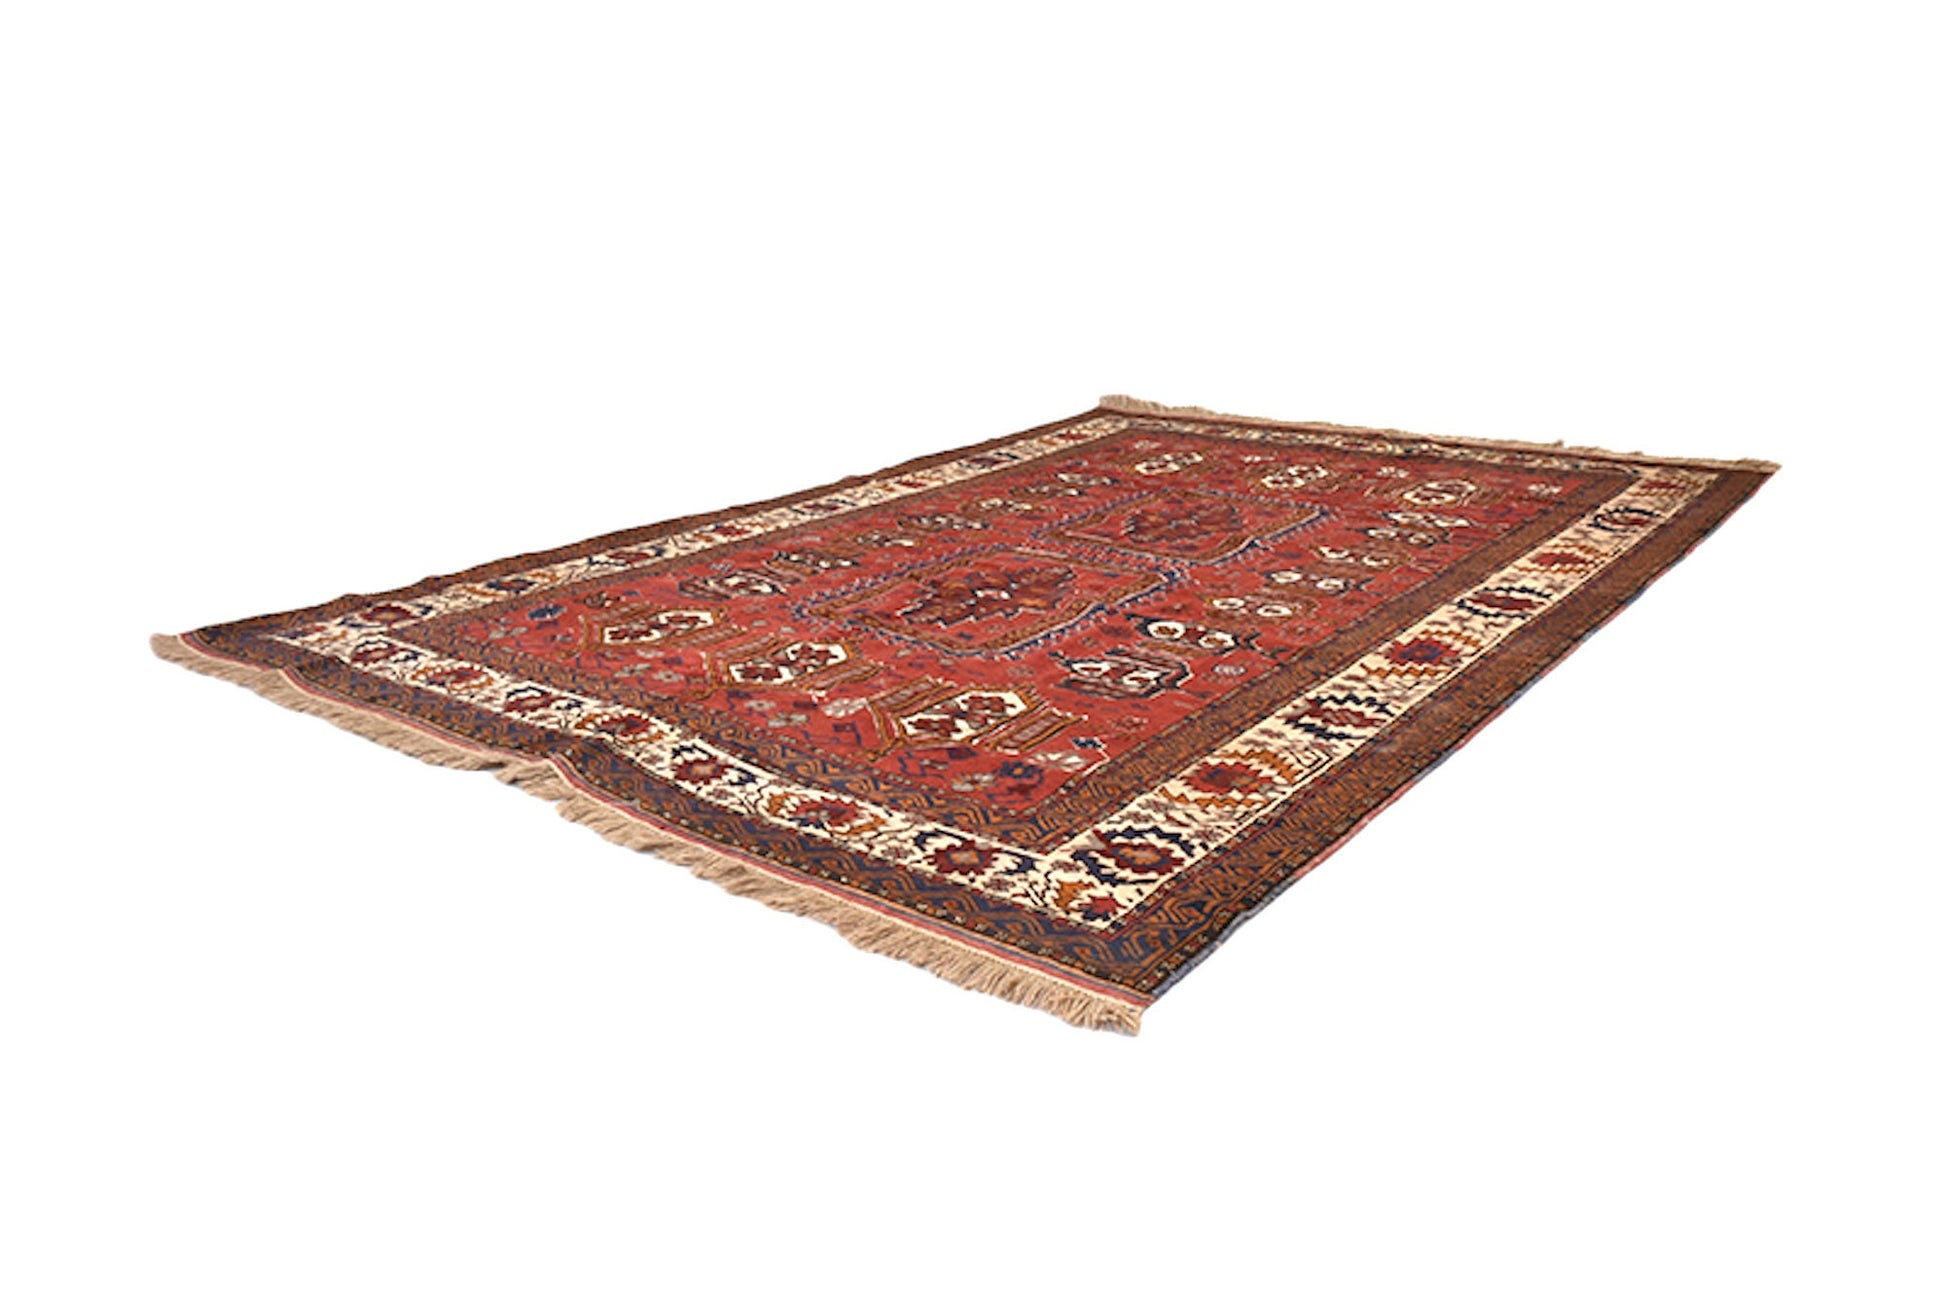 Red Brown 6x9 Hand Knotted Tribal Rug | Afghan Caucasian Low Pile Area Rug | Wool Antique Southwestern Rustic Area Rug